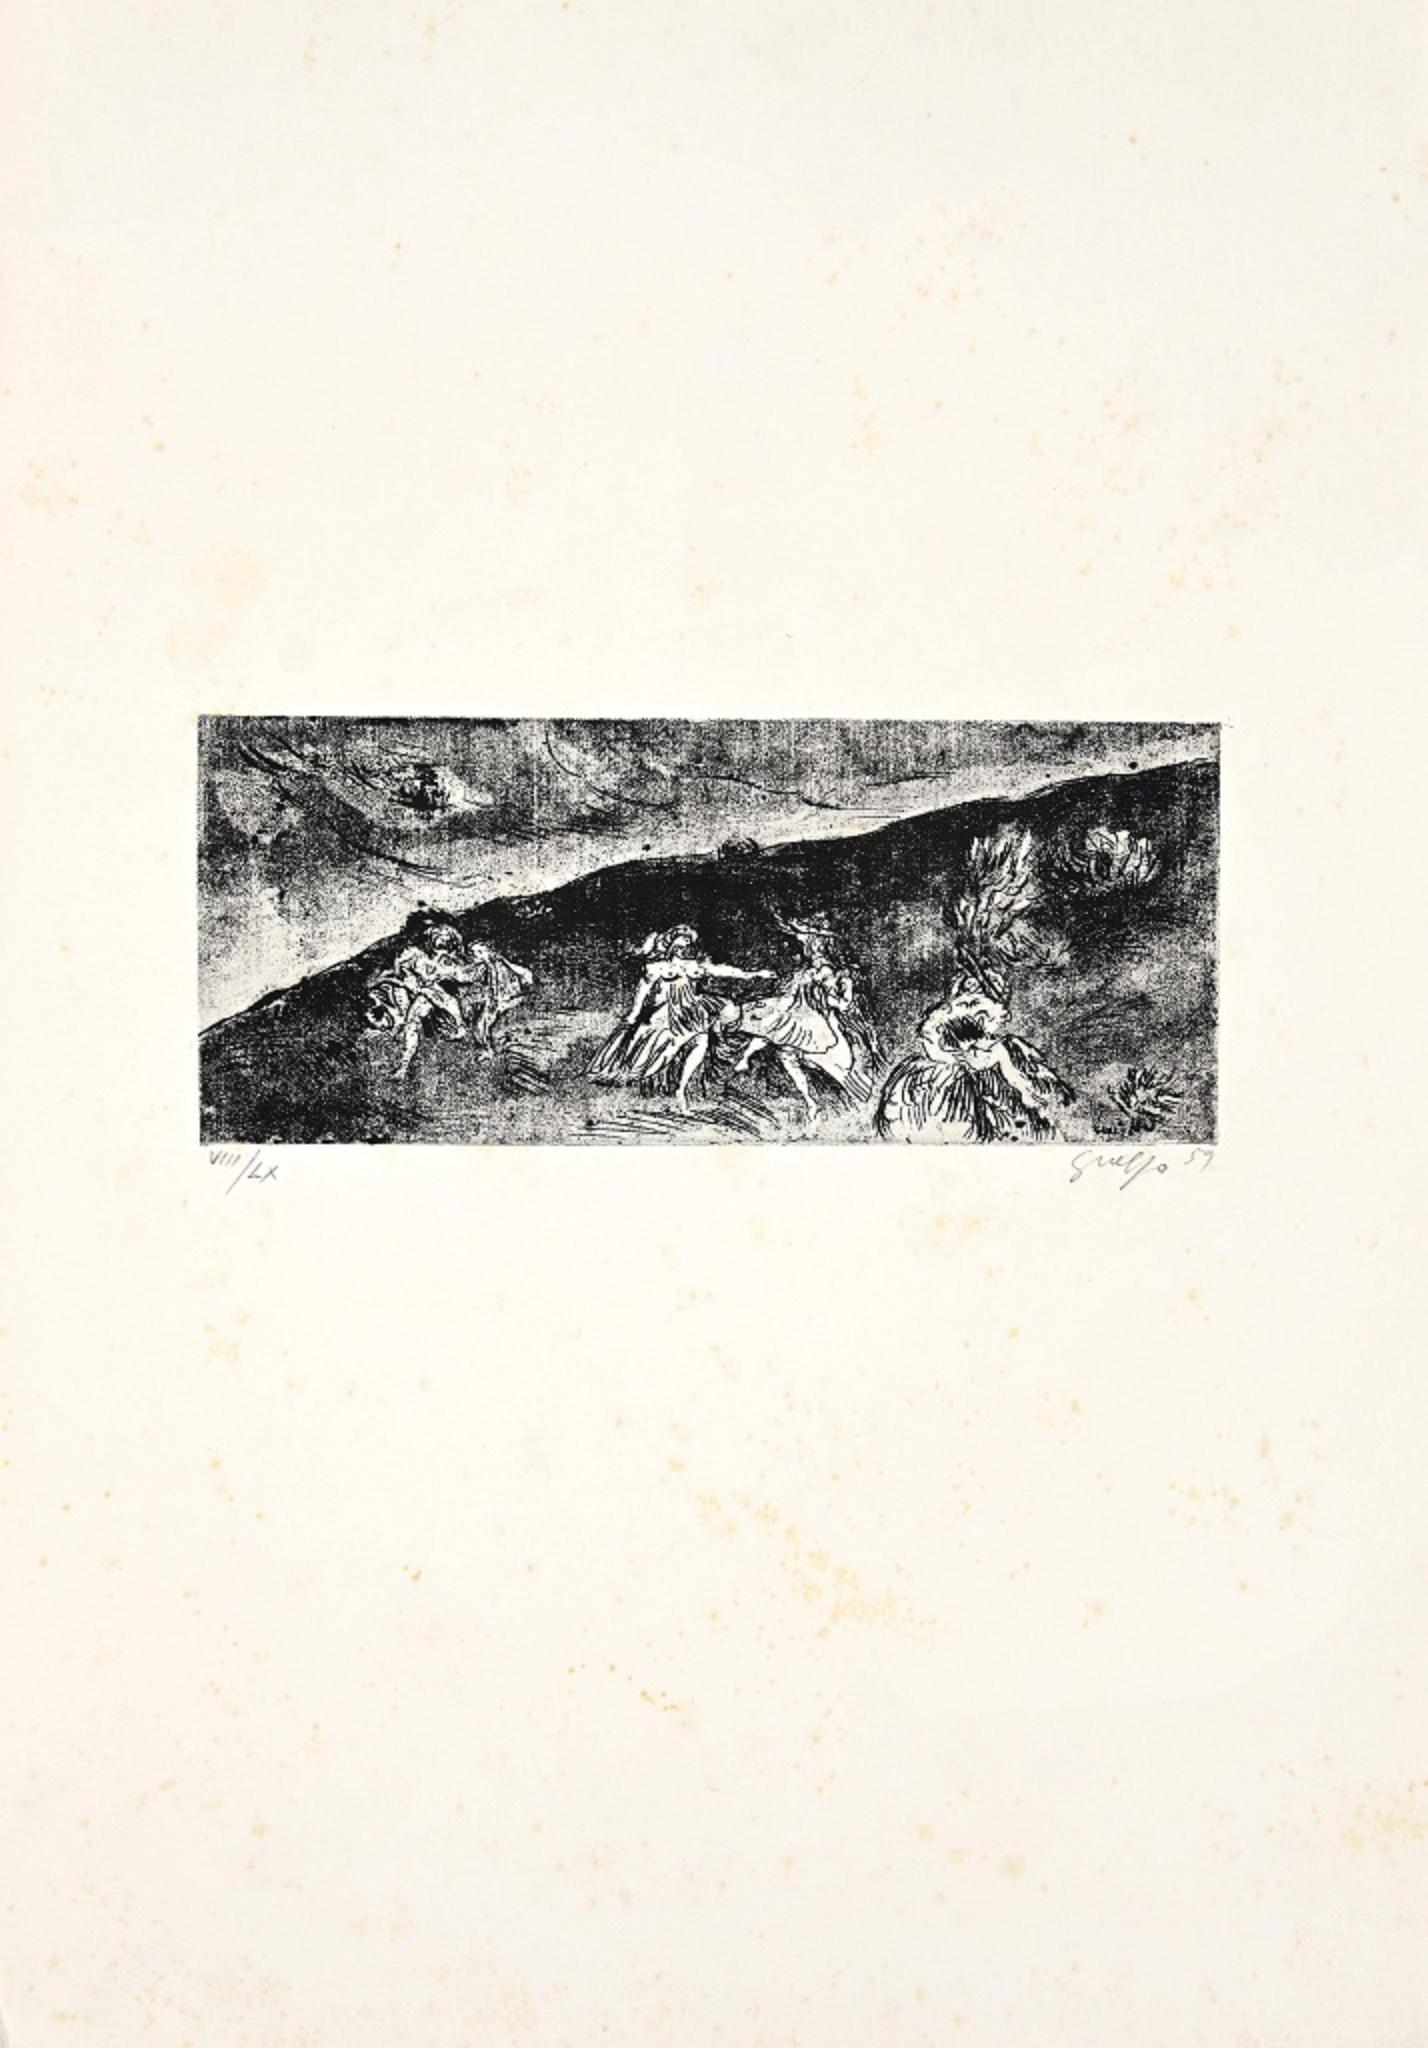 Figure 2 is an original etching realized by Guelfo Bianchini in 1959.

The artwork is hand-signed by the artist on the lower right corner, and numbered (8/60) on the lower left corner.

In very good conditions and mounted on a white cardboard